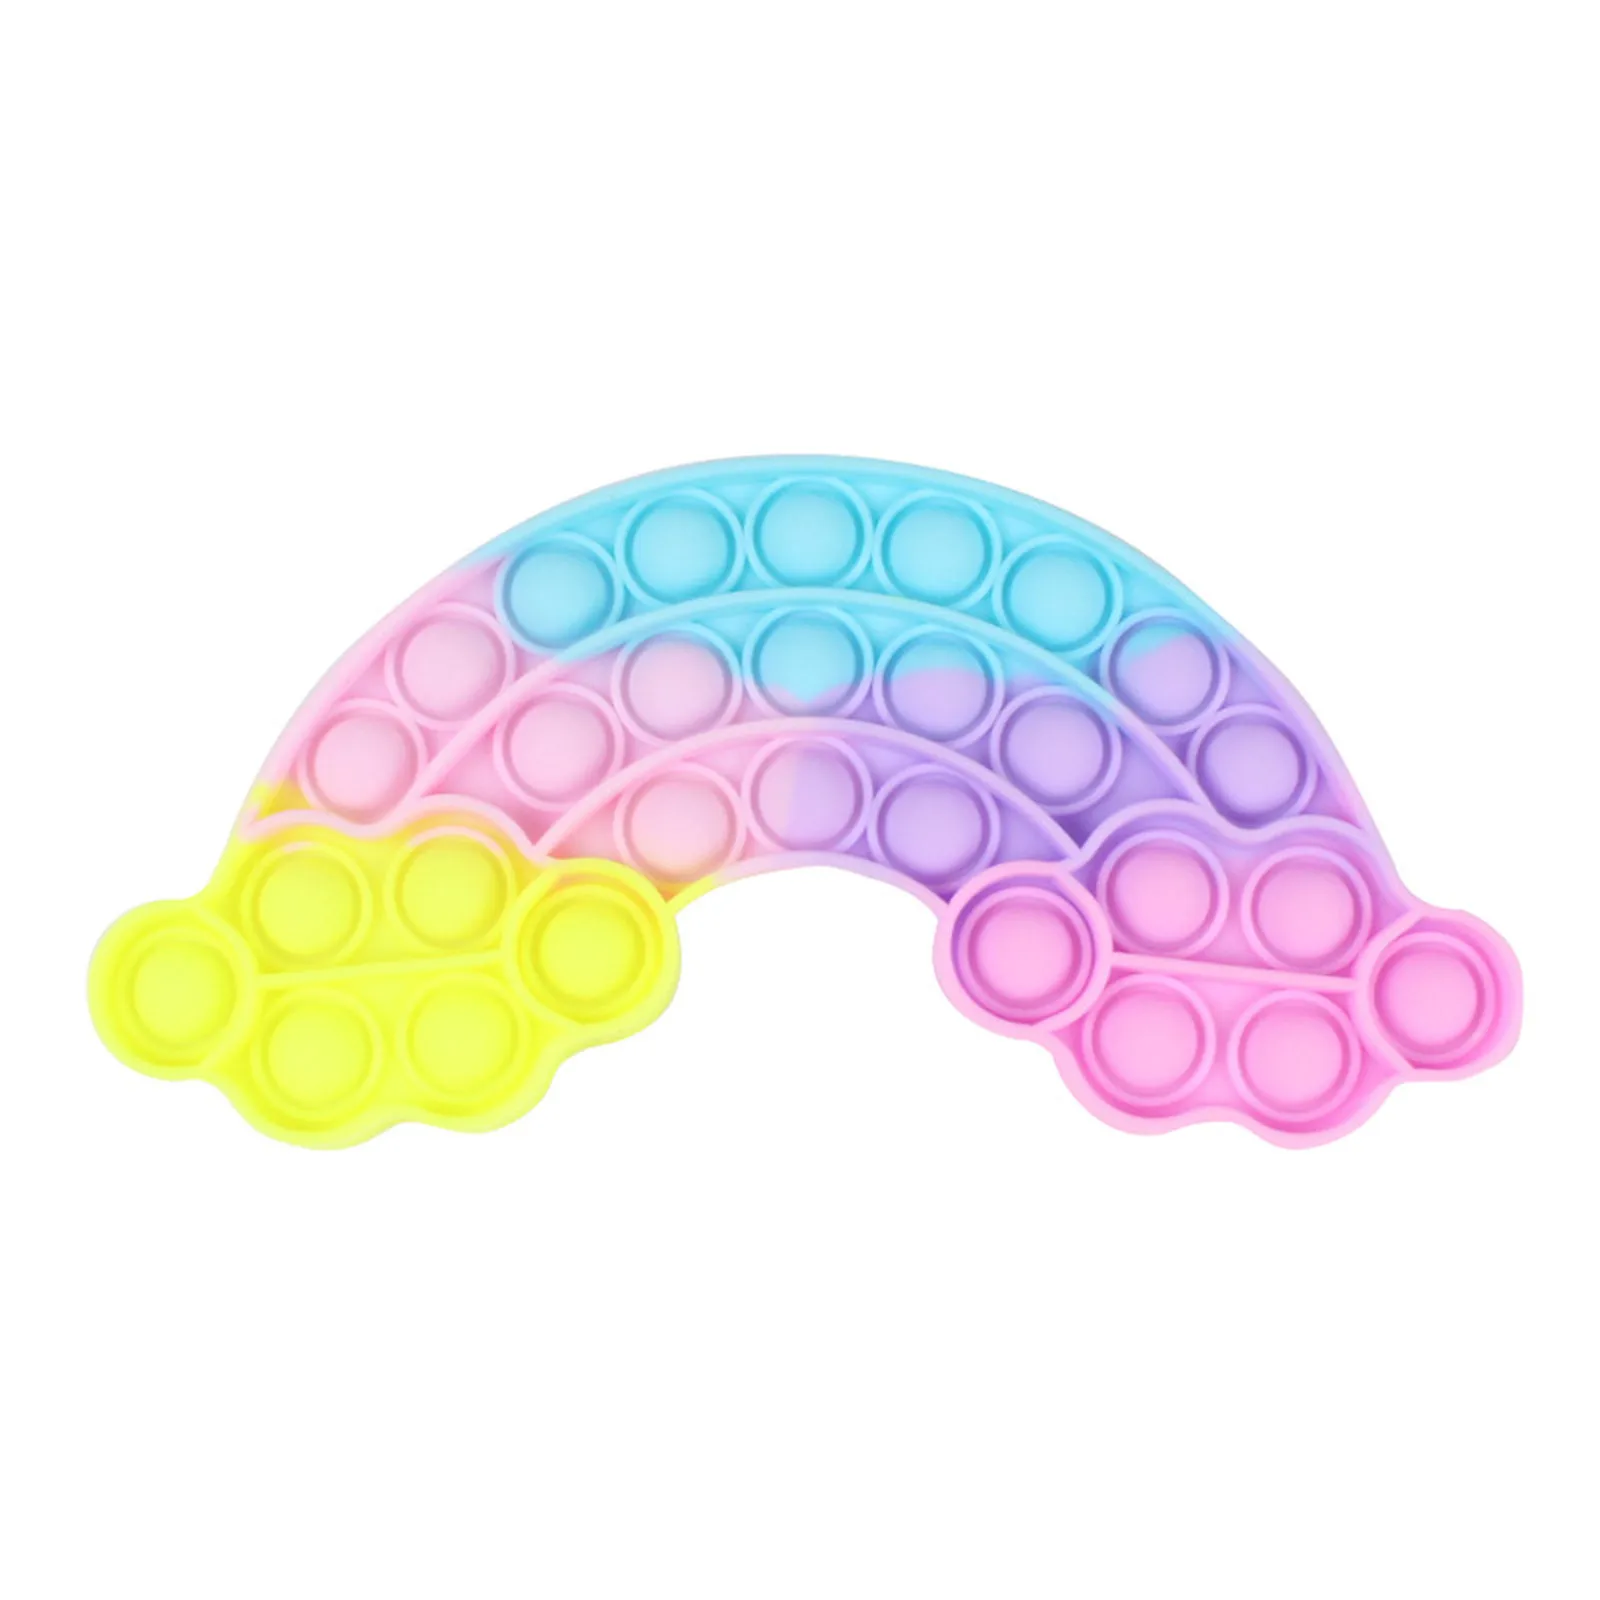 mochi's fidget toys Squishy Fidget Toys Push Toy Square Antistress New Push Bubble Rainbow Popits For Hands Popins Pops Reliver Stress For Adults squeezy toys